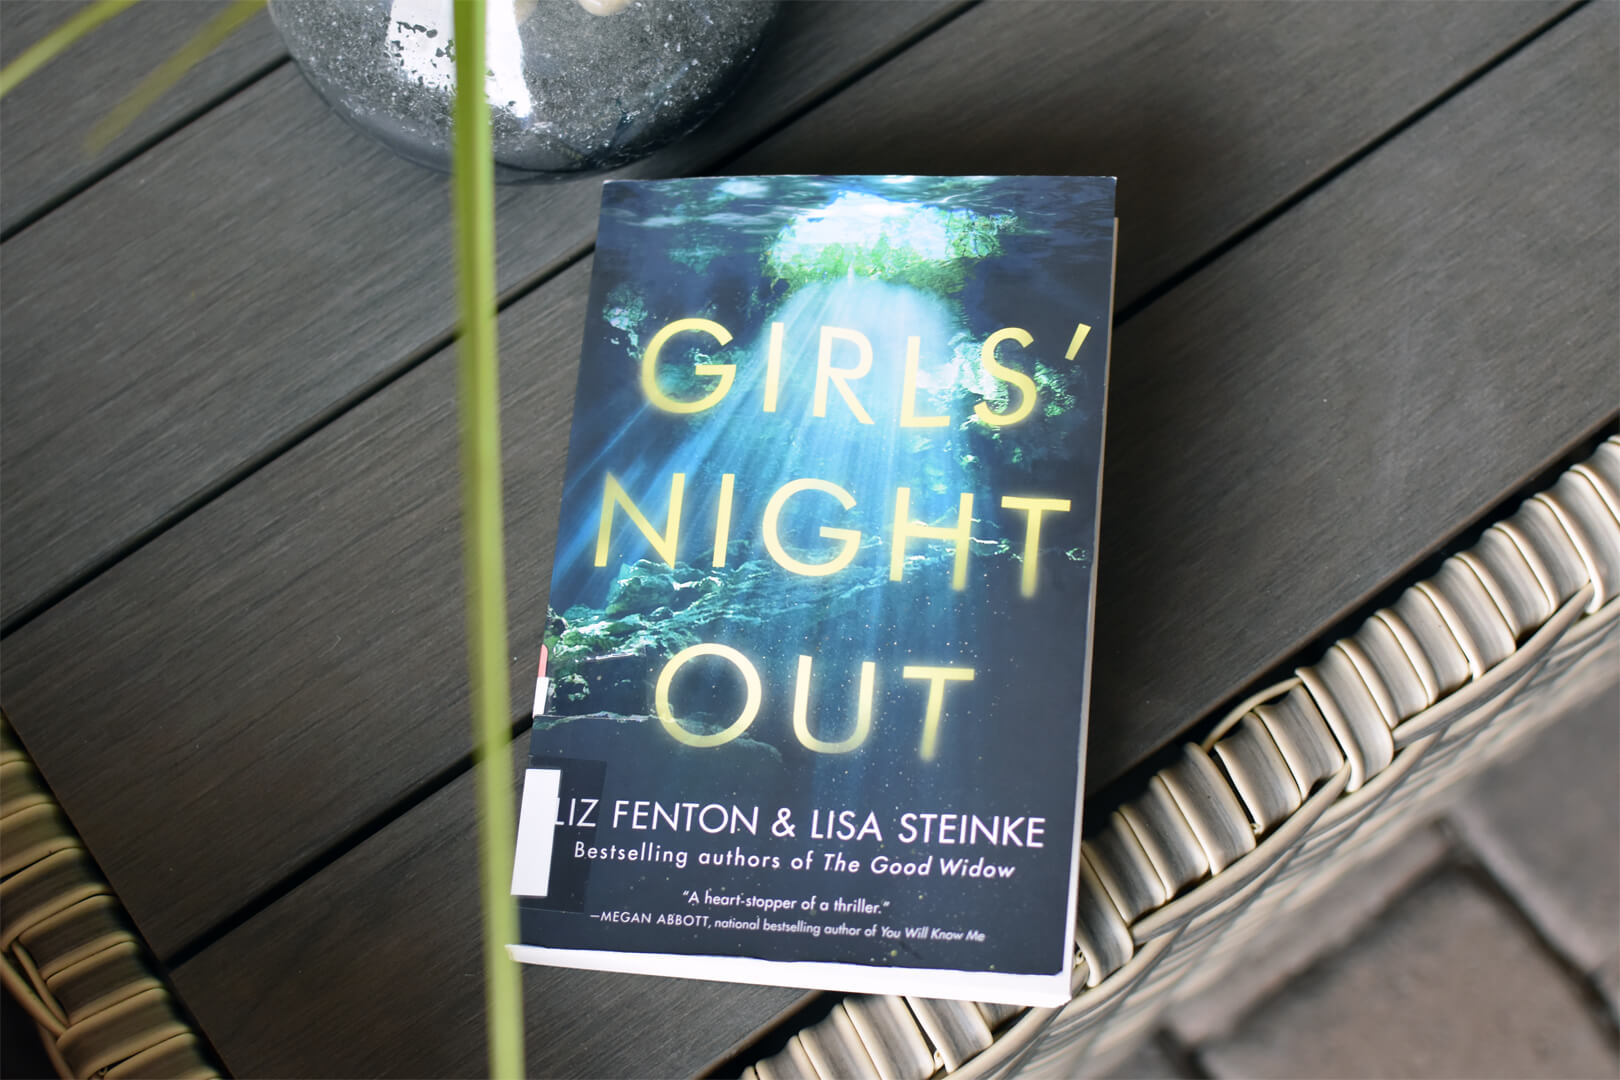 Preview: Girls’ Night Out by Liz Fenton and Lisa Steinke